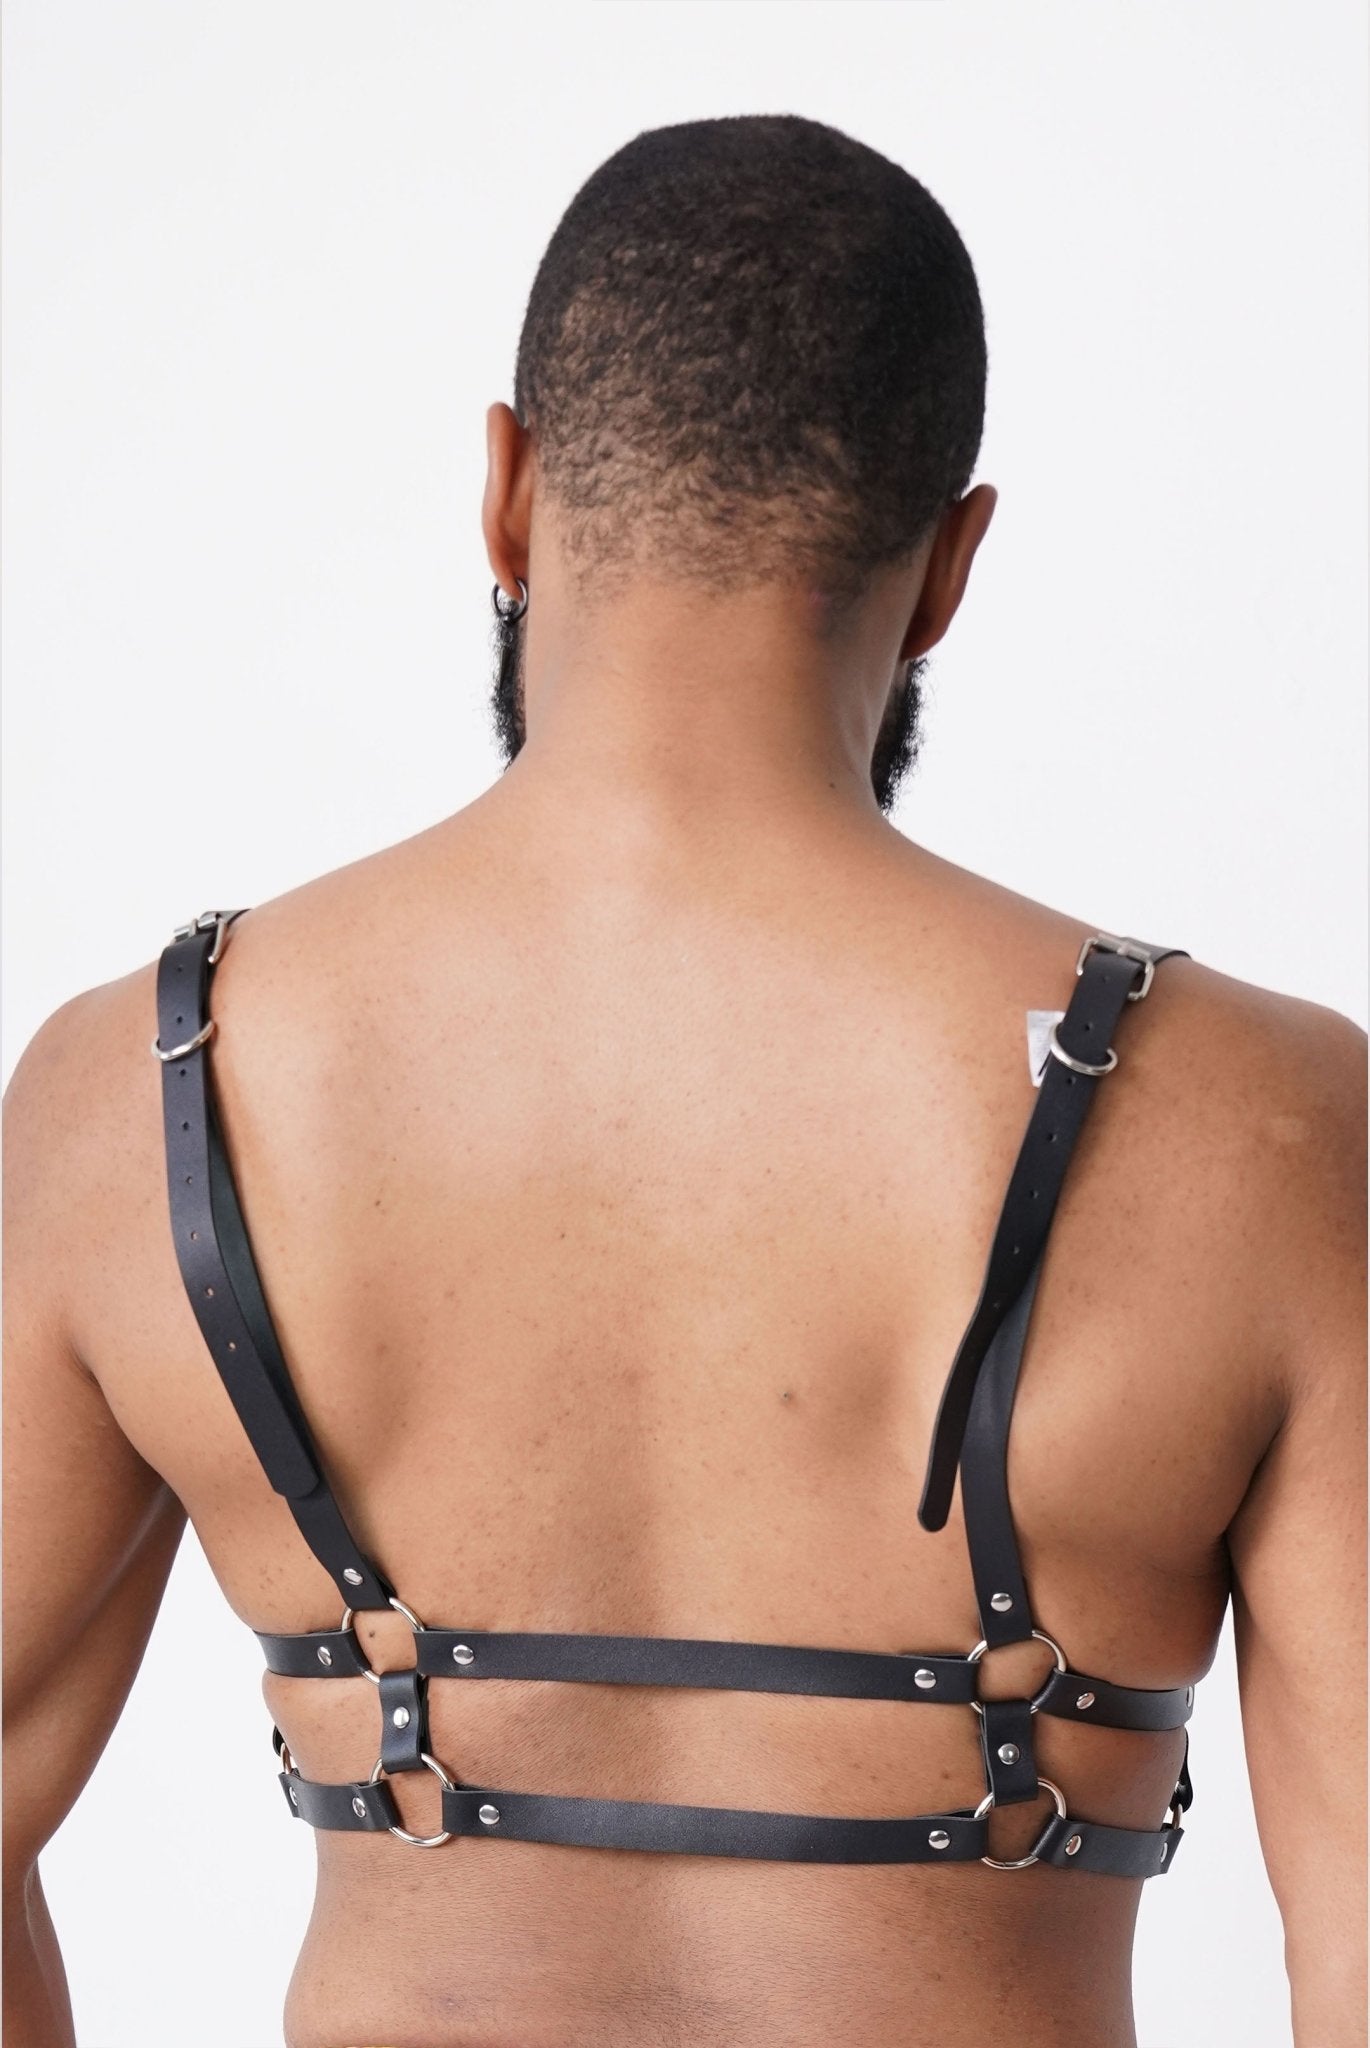 Black Sexy Fetish Male Leather Harness, Harness, bdsm harness, fetish harness